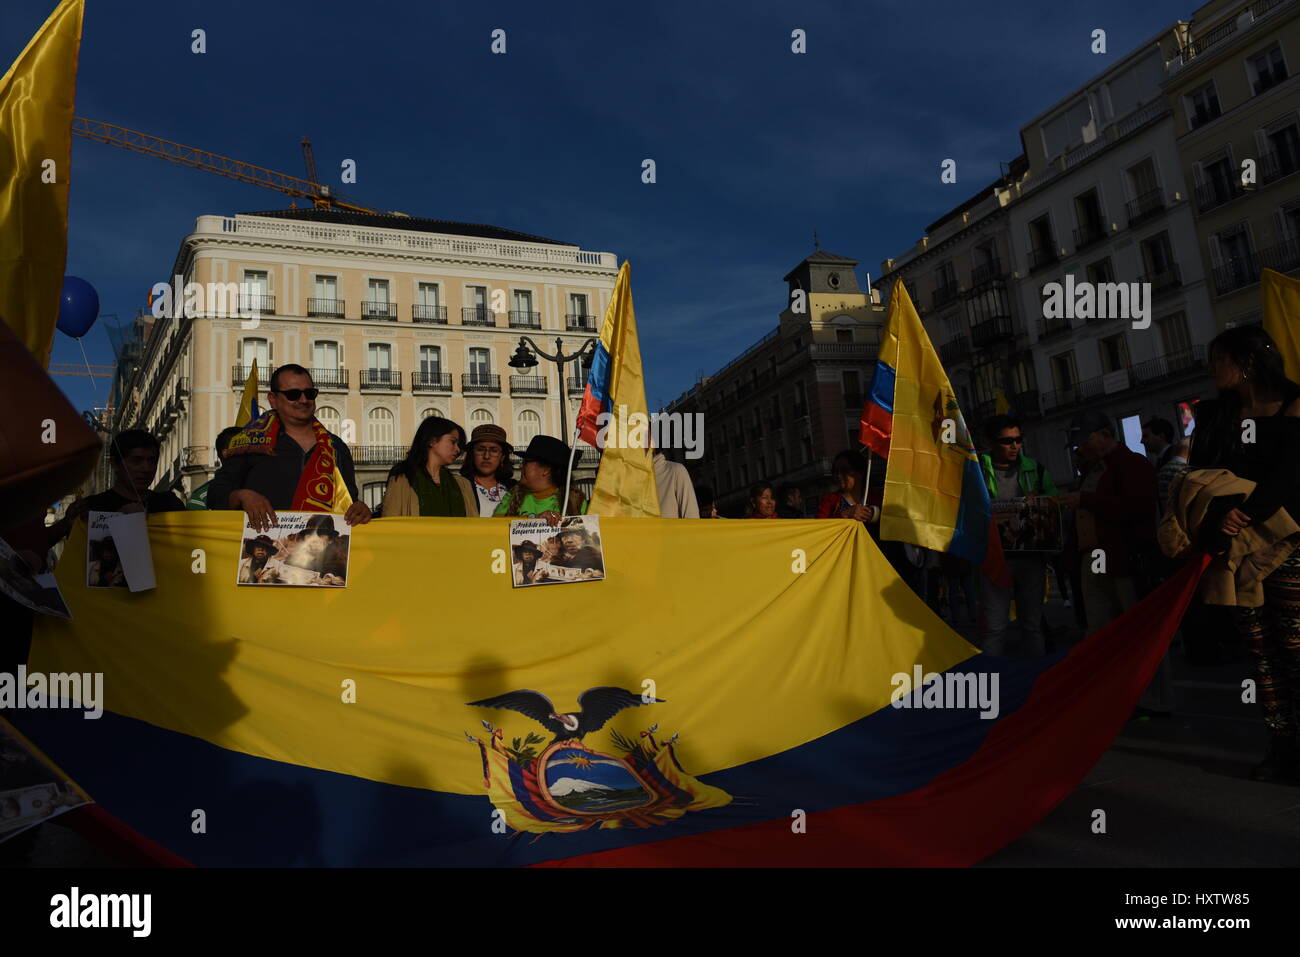 Madrid, Spain. 29th Mar, 2017. Supporters of Lenin Moreno, candidate of the ruling PAIS Alliance Party, pictured during the closing event of his party's election campaign in Madrid. Credit: Jorge Sanz/Pacific Press/Alamy Live News Stock Photo